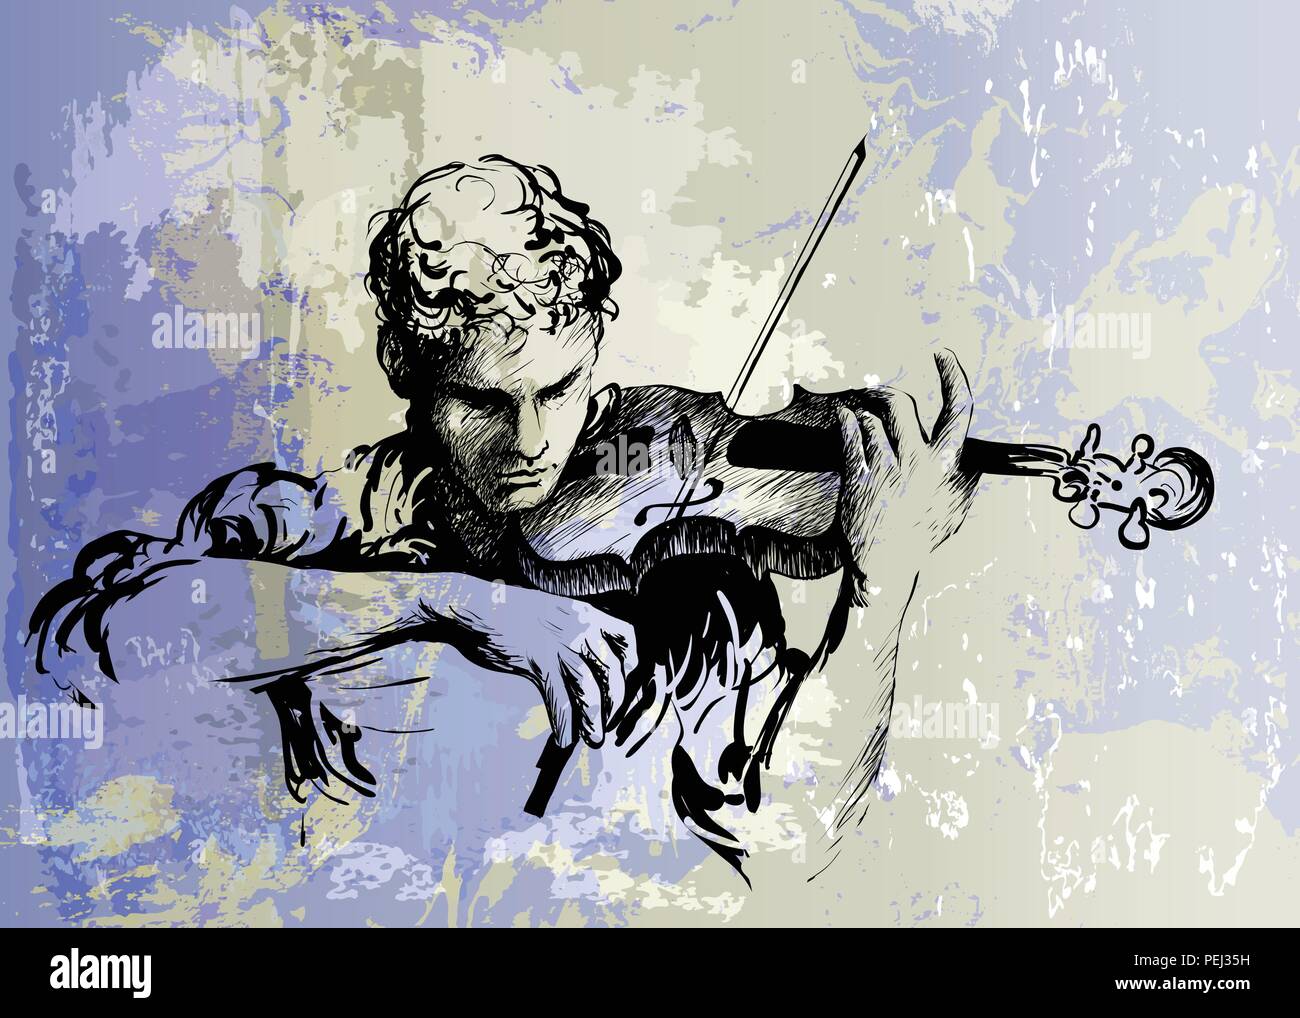 Classical music concert. Violinist playing classical violin Stock Vector